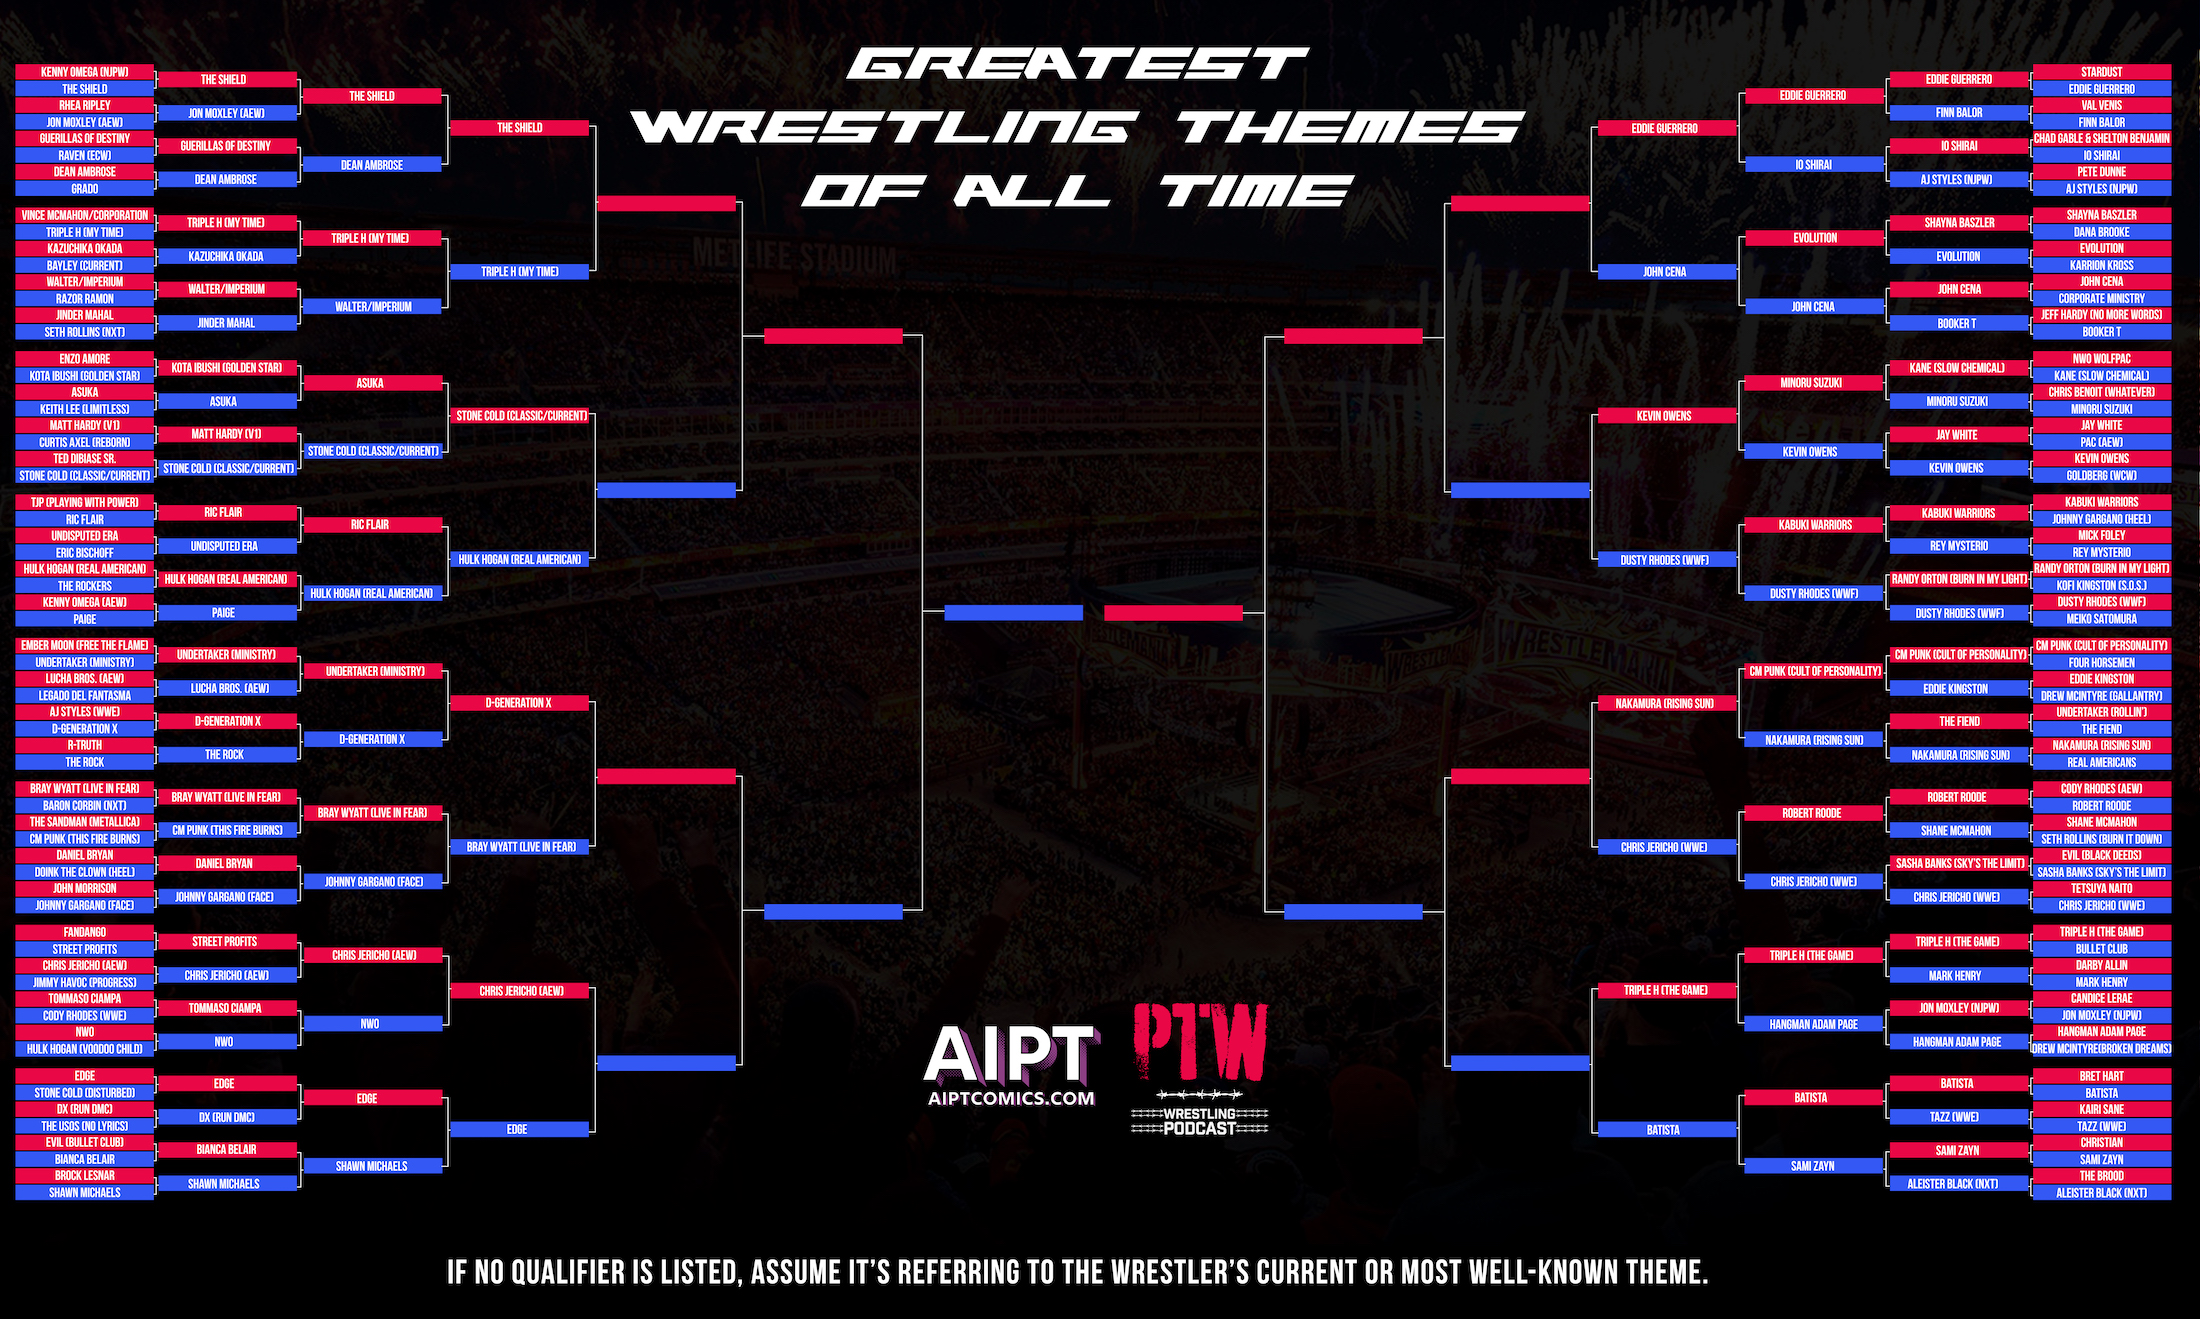 The Greatest Wrestling Themes of All Time: Round 4